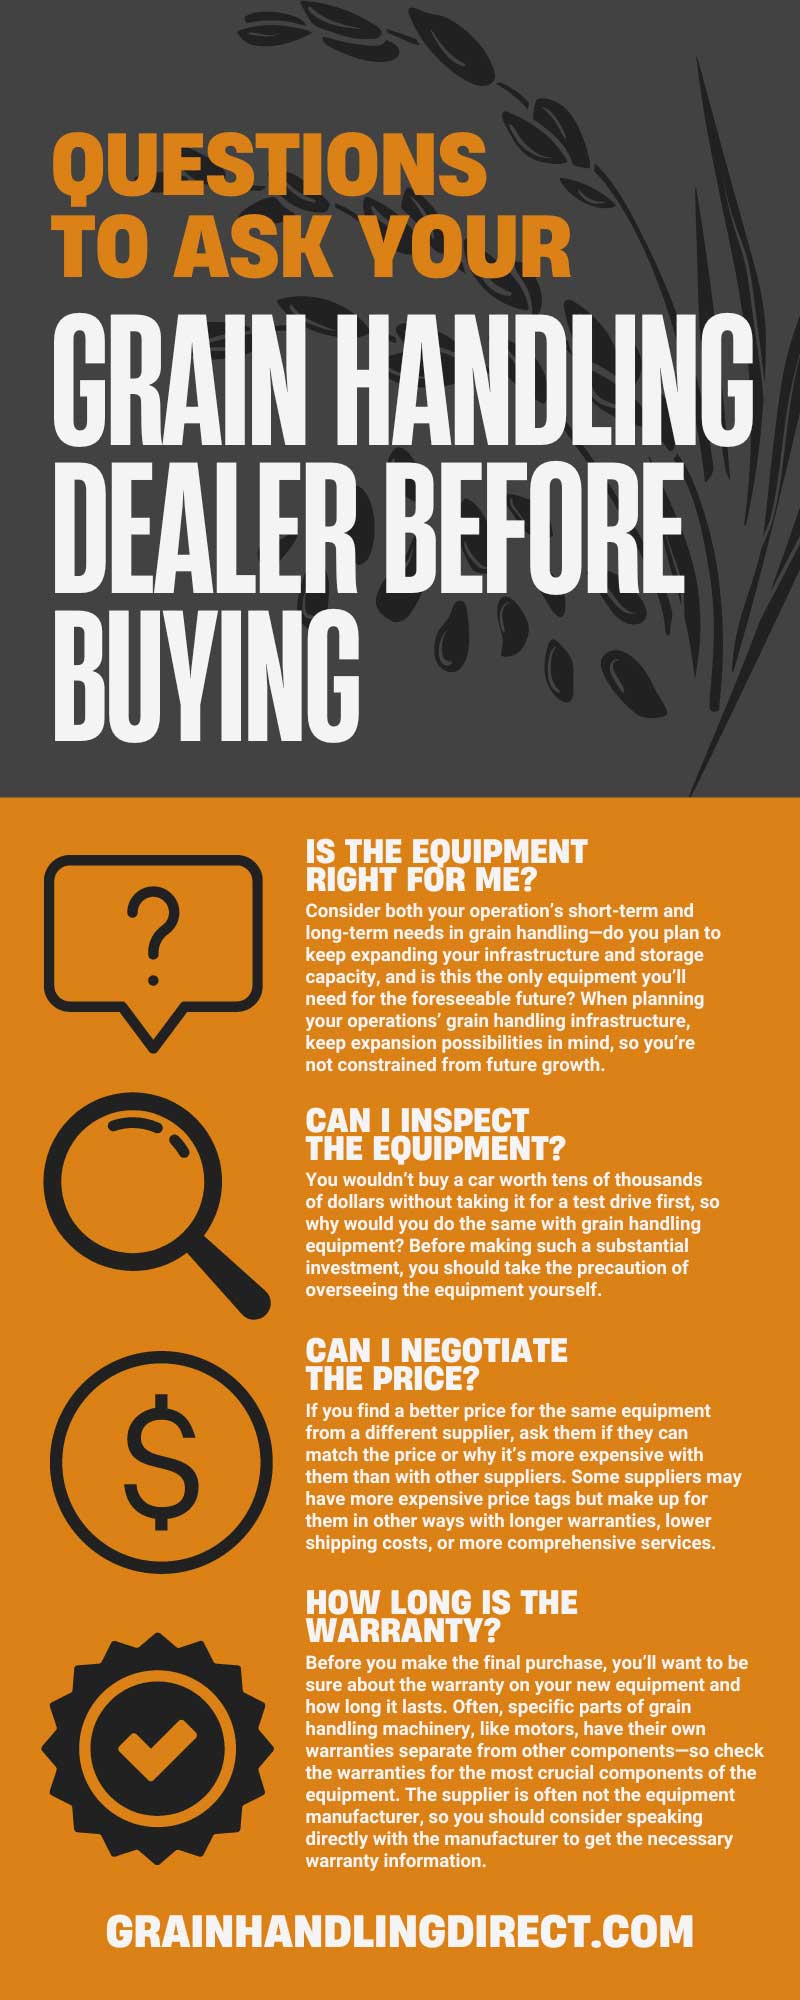 7 Questions To Ask Your Grain Handling Dealer Before Buying